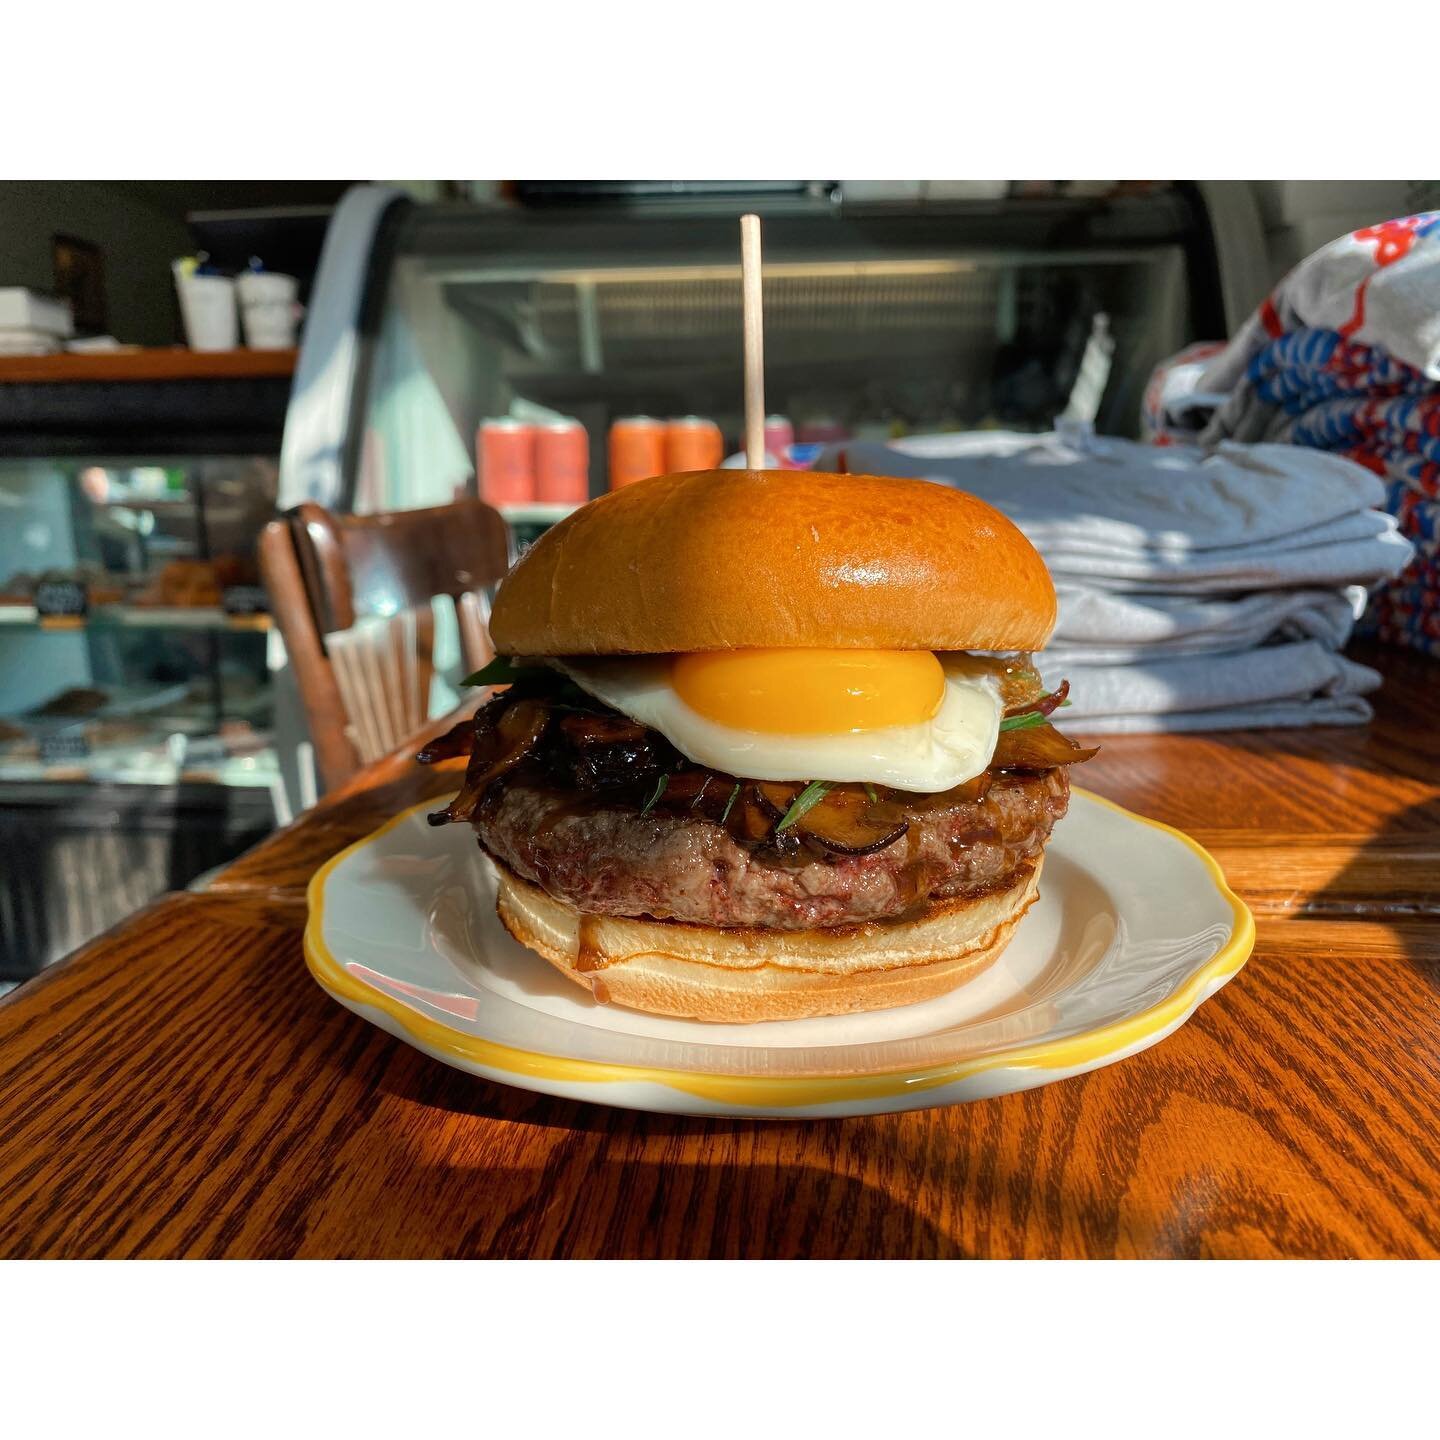 teriyaki @tworivermushroom burger with sunny egg n scallions  for you today. big thanks to two river for surprising us with a box of beautiful local shrooms this weekend. you sure know how to make a place feel loved.